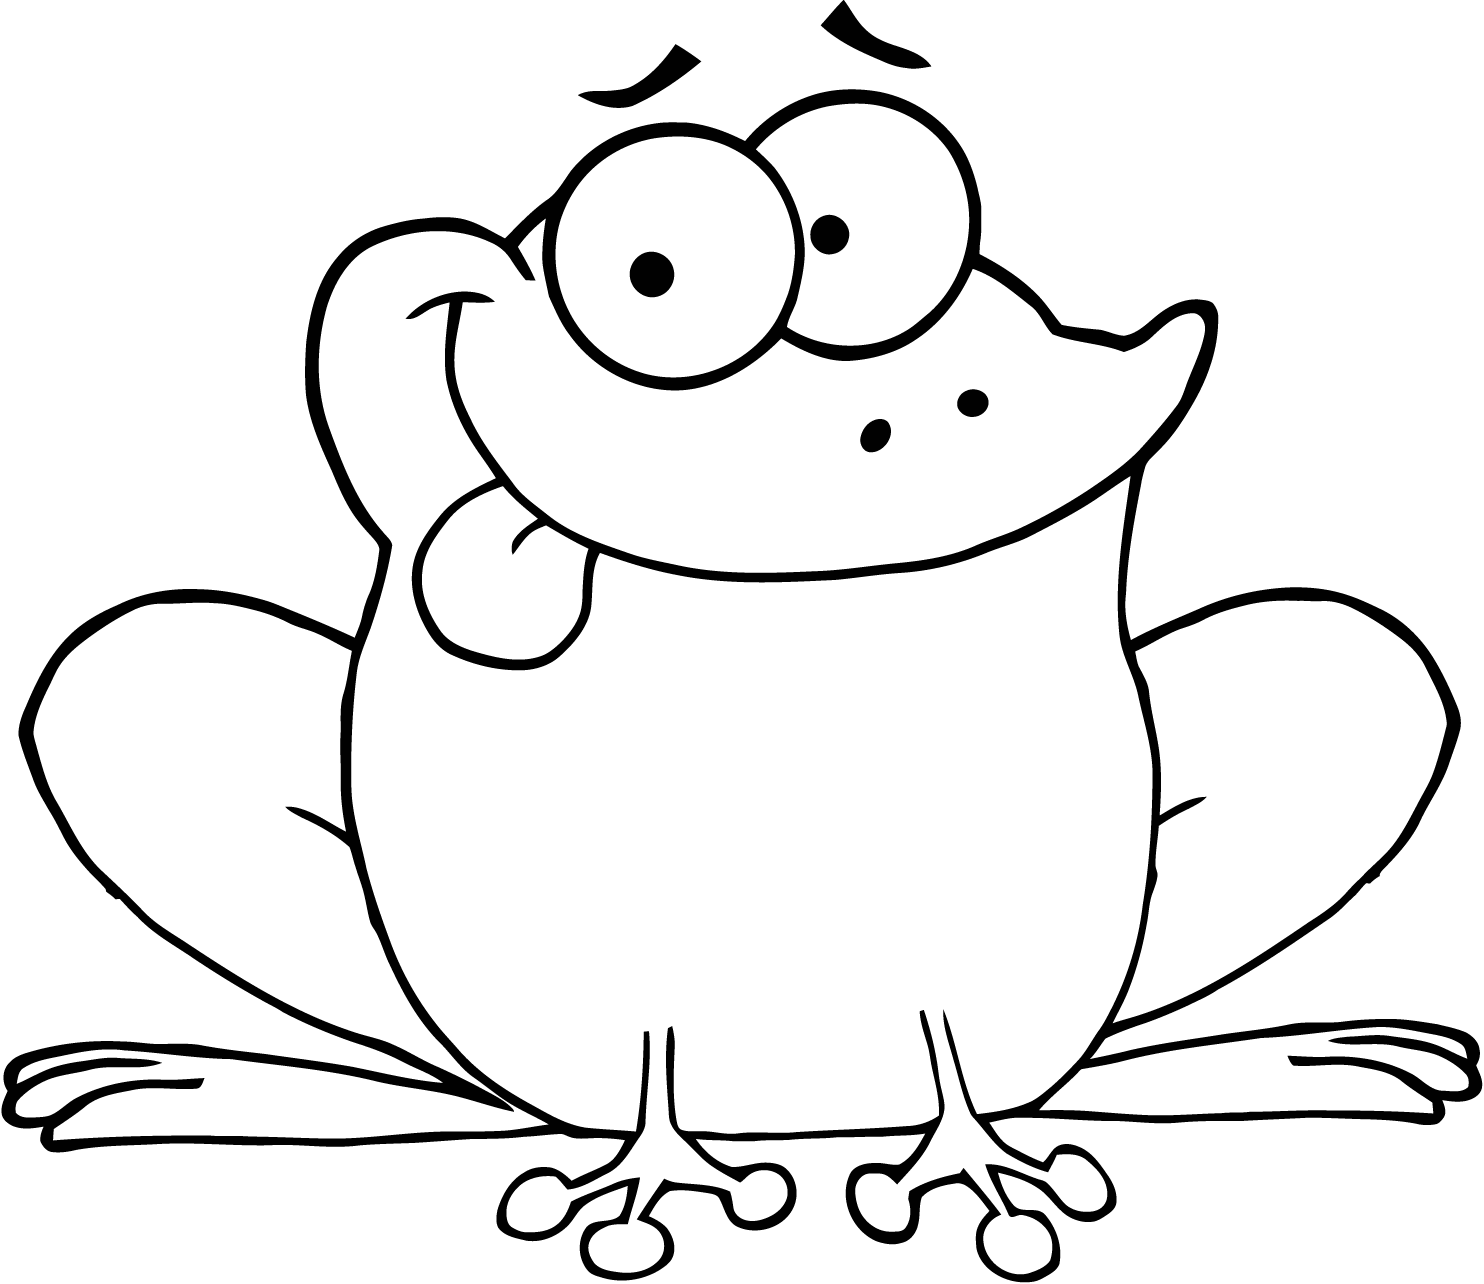 Animal Coloring Pages Frog - Coloring Pages For All Ages